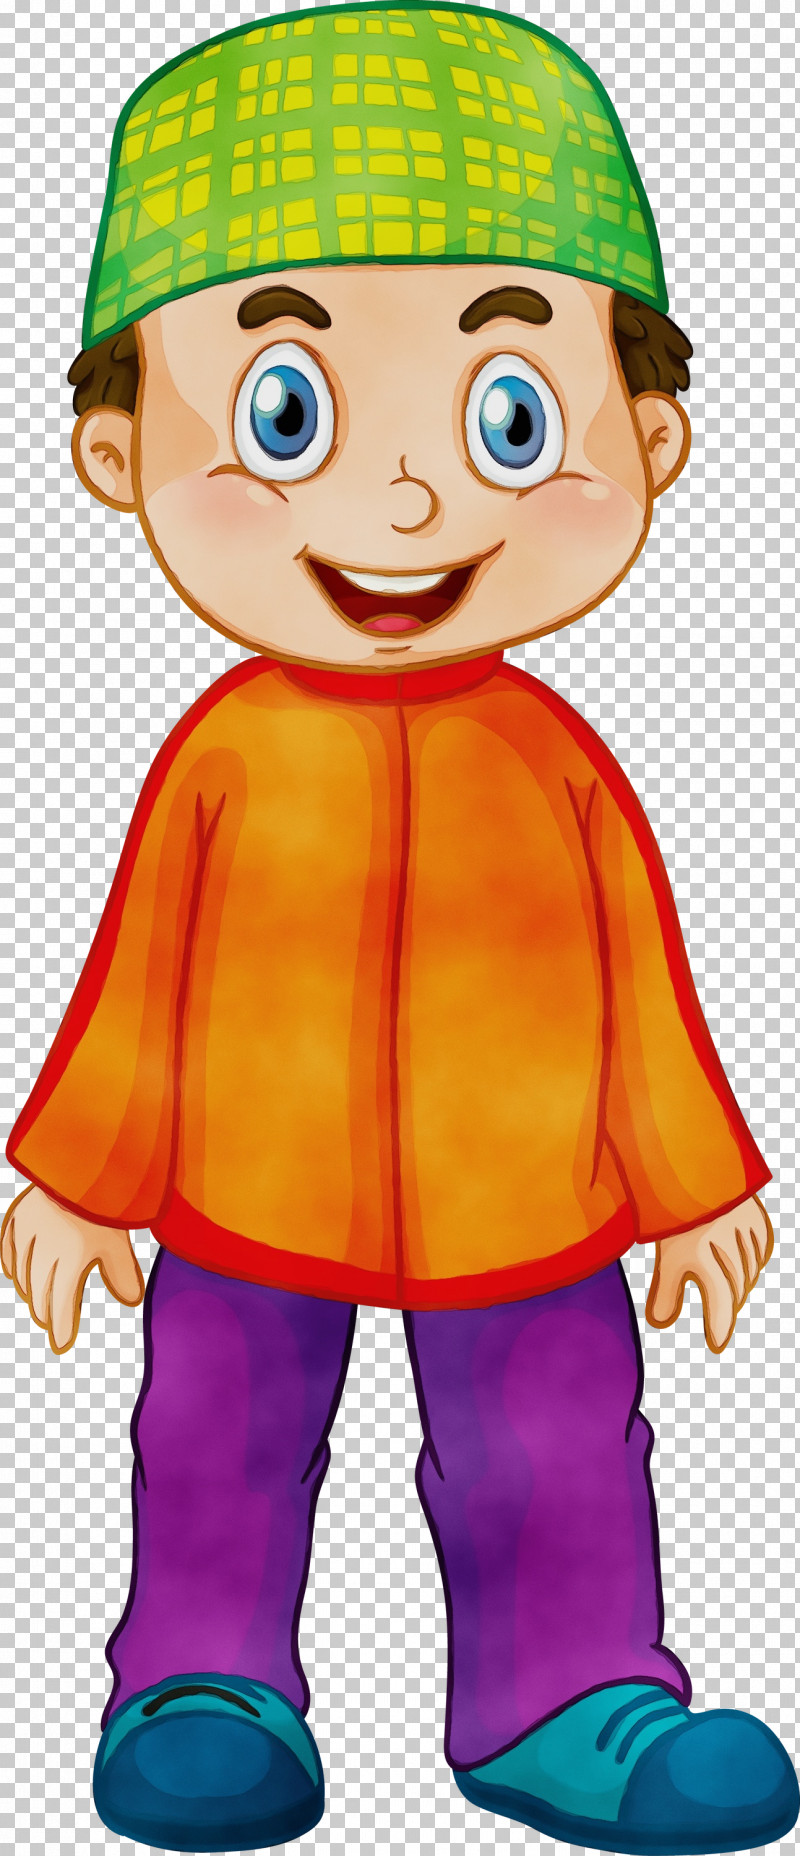 Cartoon Child Child Art Costume Toddler PNG, Clipart, Cartoon, Child, Child Art, Costume, Muslim People Free PNG Download